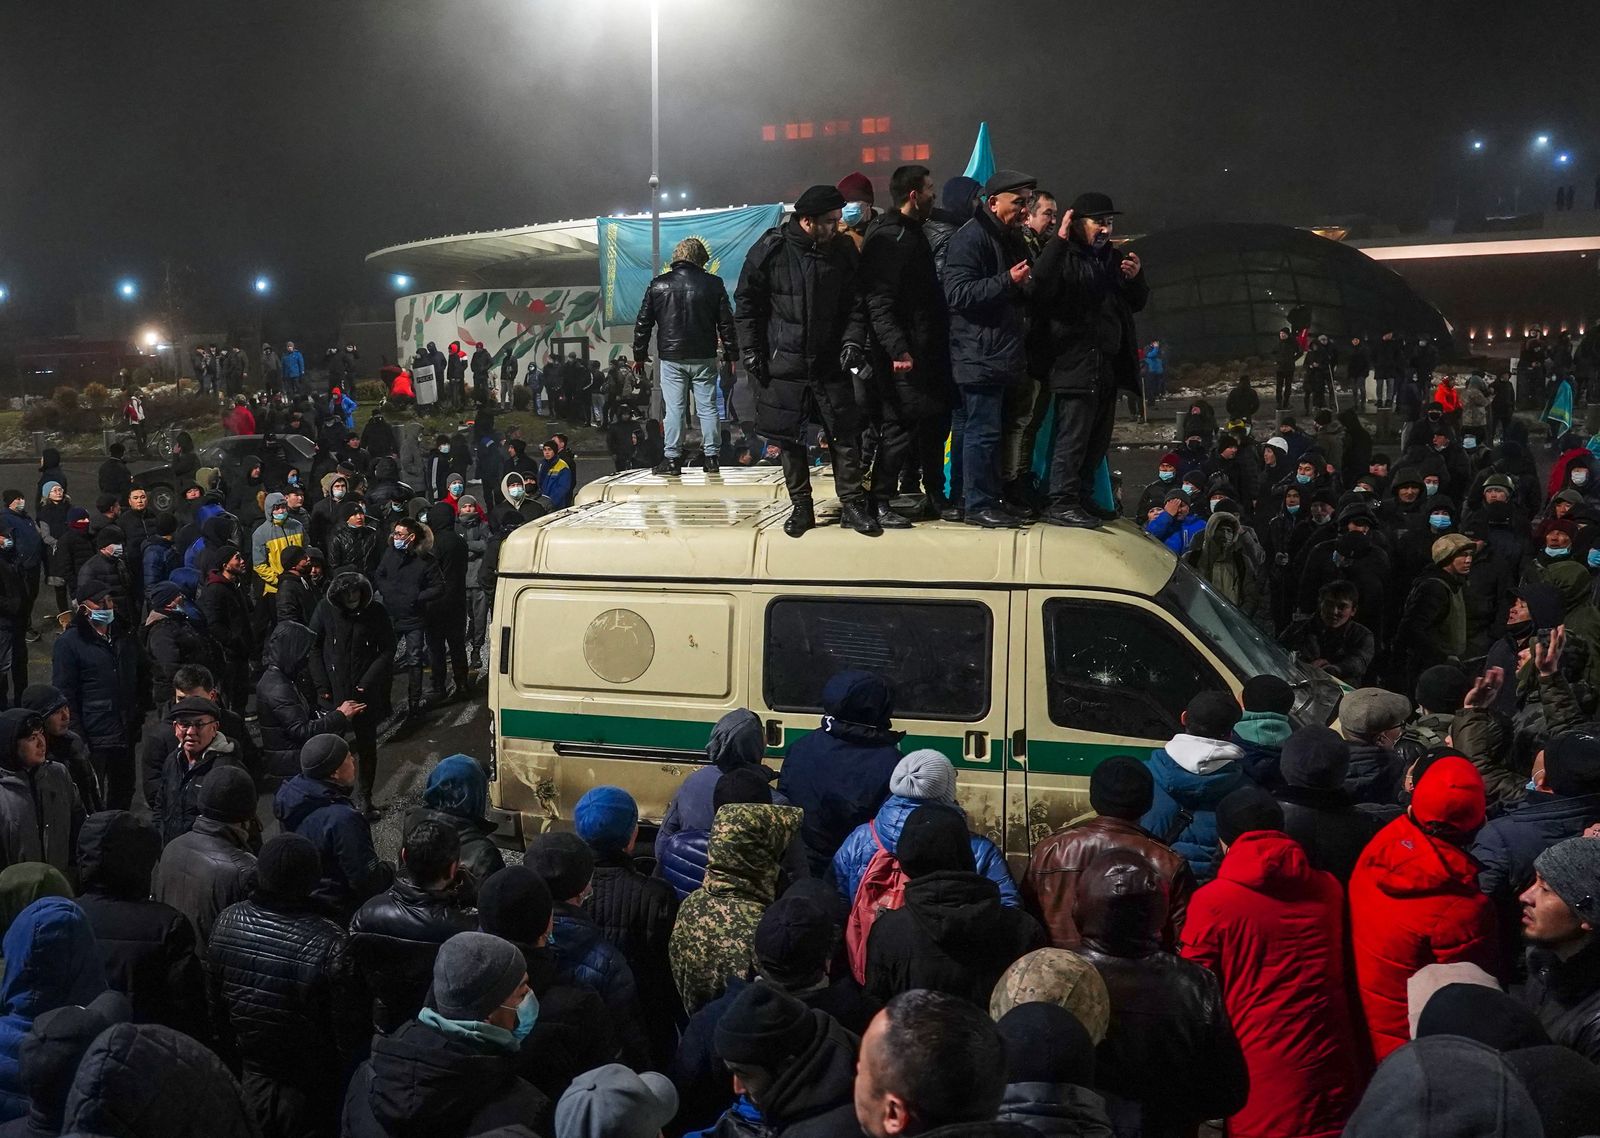 Protesters take part in a rally over a hike in energy prices in Almaty on January 5, 2022. - Kazakhstan on January 5, 2022 declared a nationwide state of emergency after protests over a fuel price hike erupted into clashes and saw demonstrators storm government buildings. (Photo by Abduaziz MADYAROV / AFP) - AFP